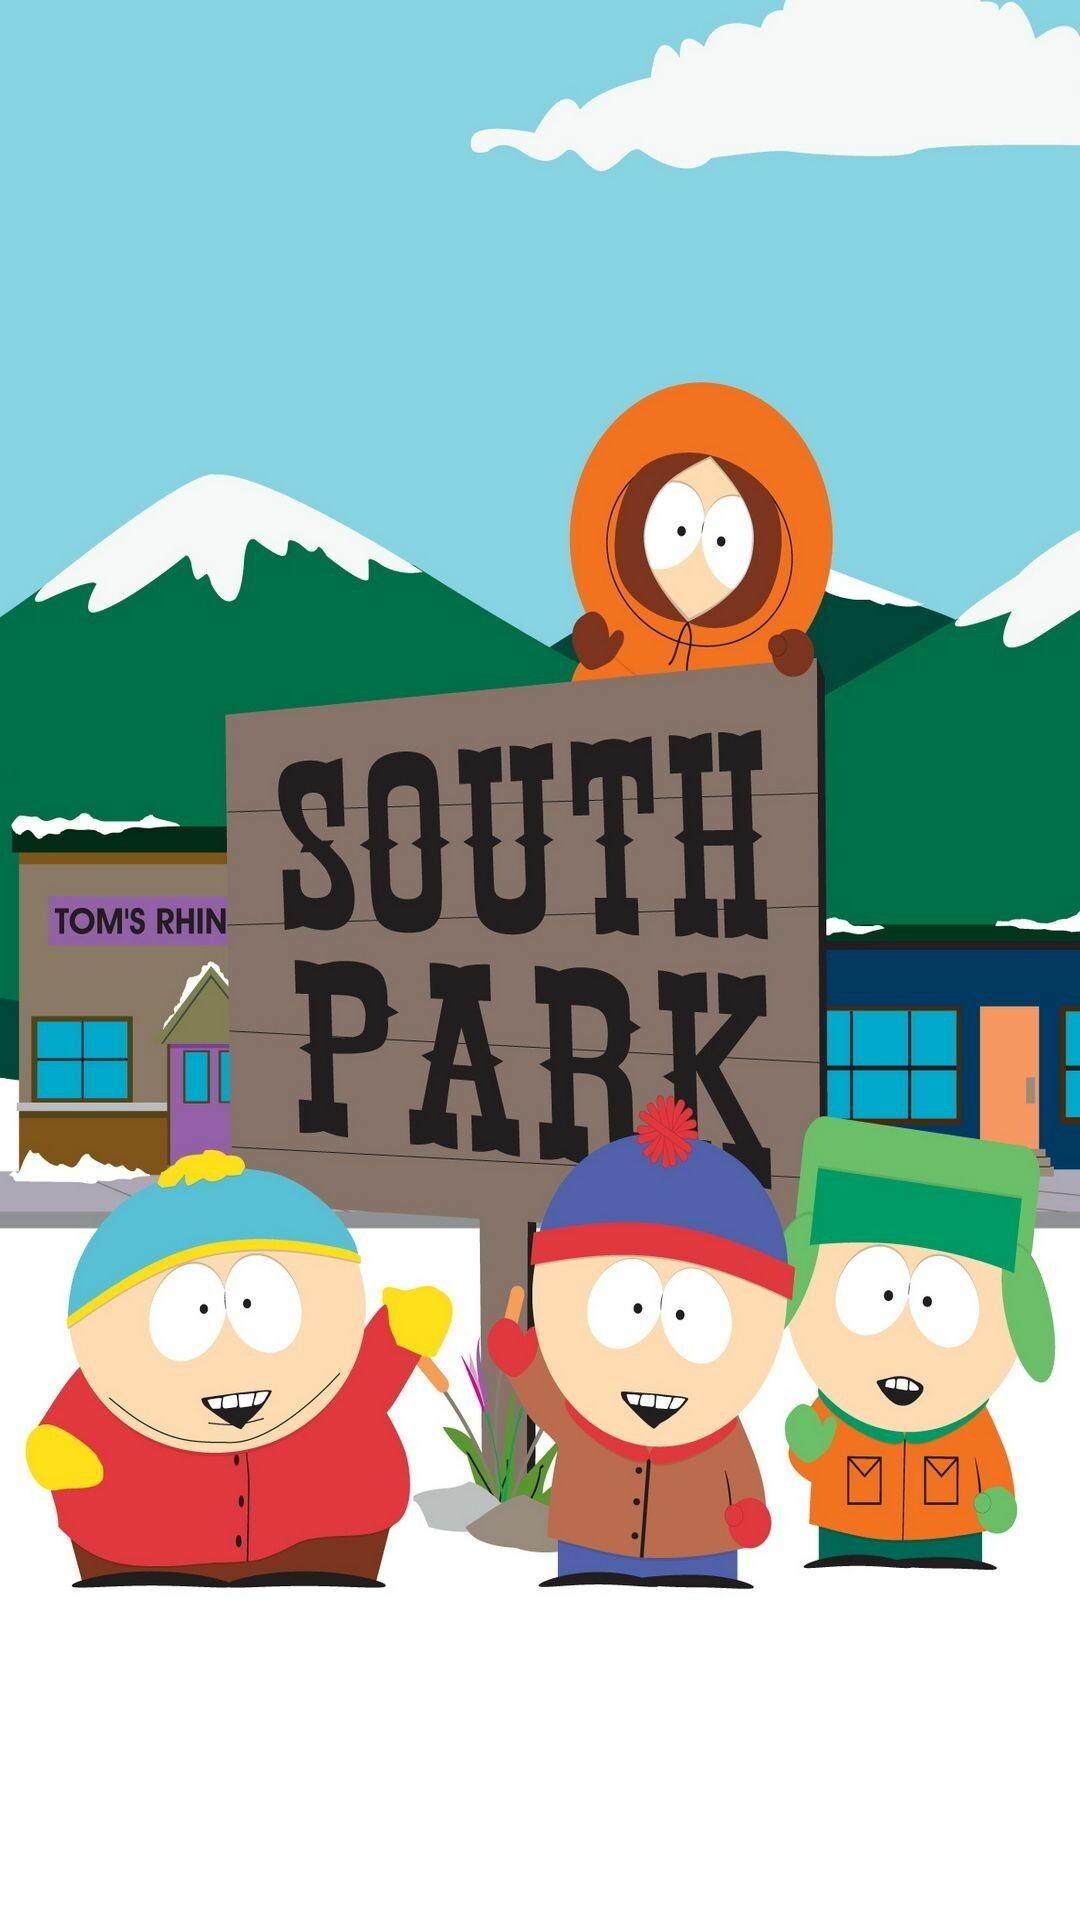 South Park: The second longest-running cartoon in North America, following right behind The Simpsons. 1080x1920 Full HD Wallpaper.